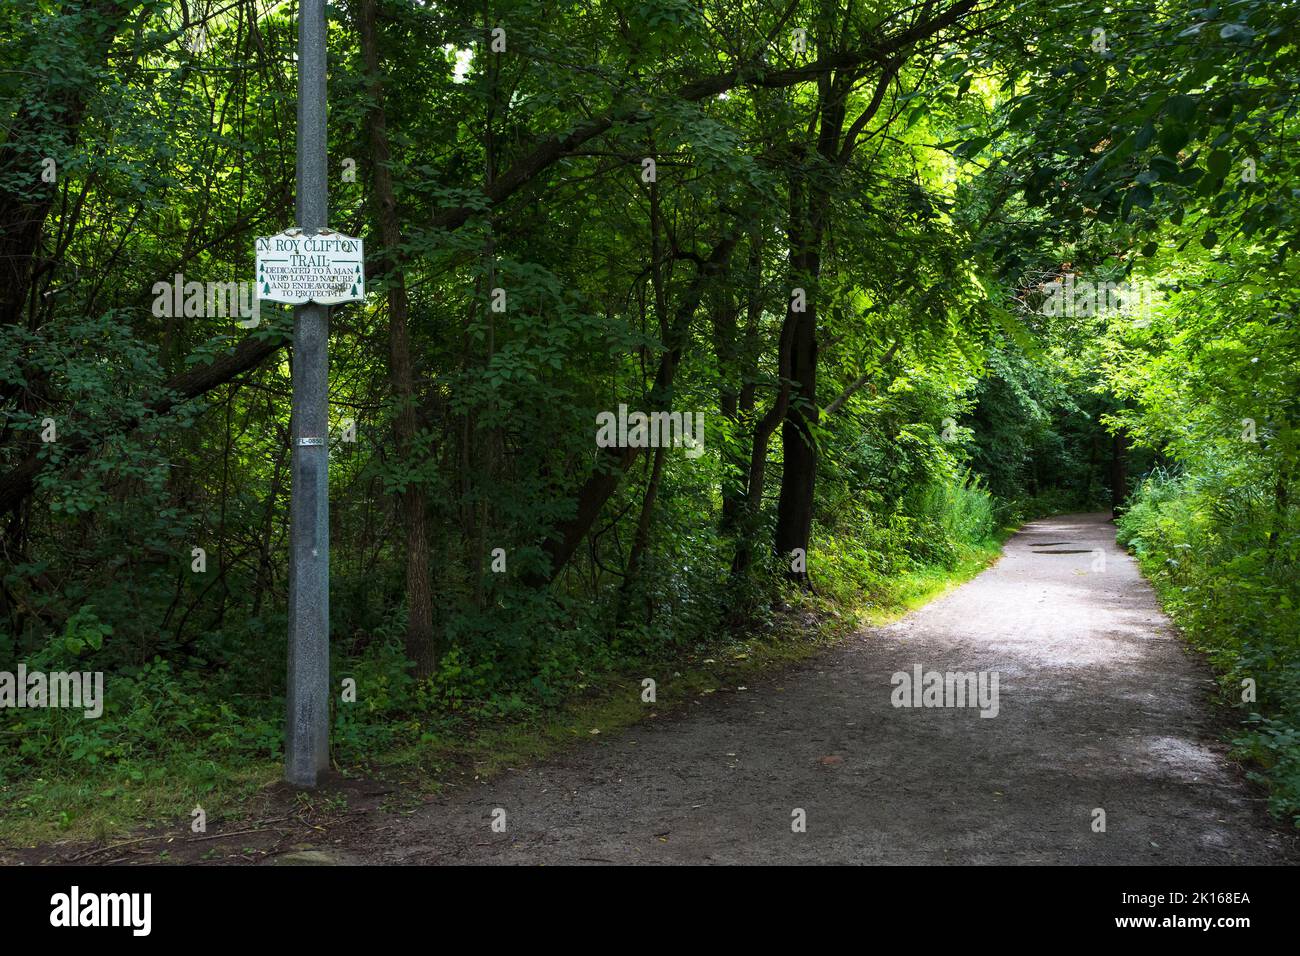 N. Roy Clifton trail in Mill pond park, Richmond Hill, Ontario, Canada Stock Photo